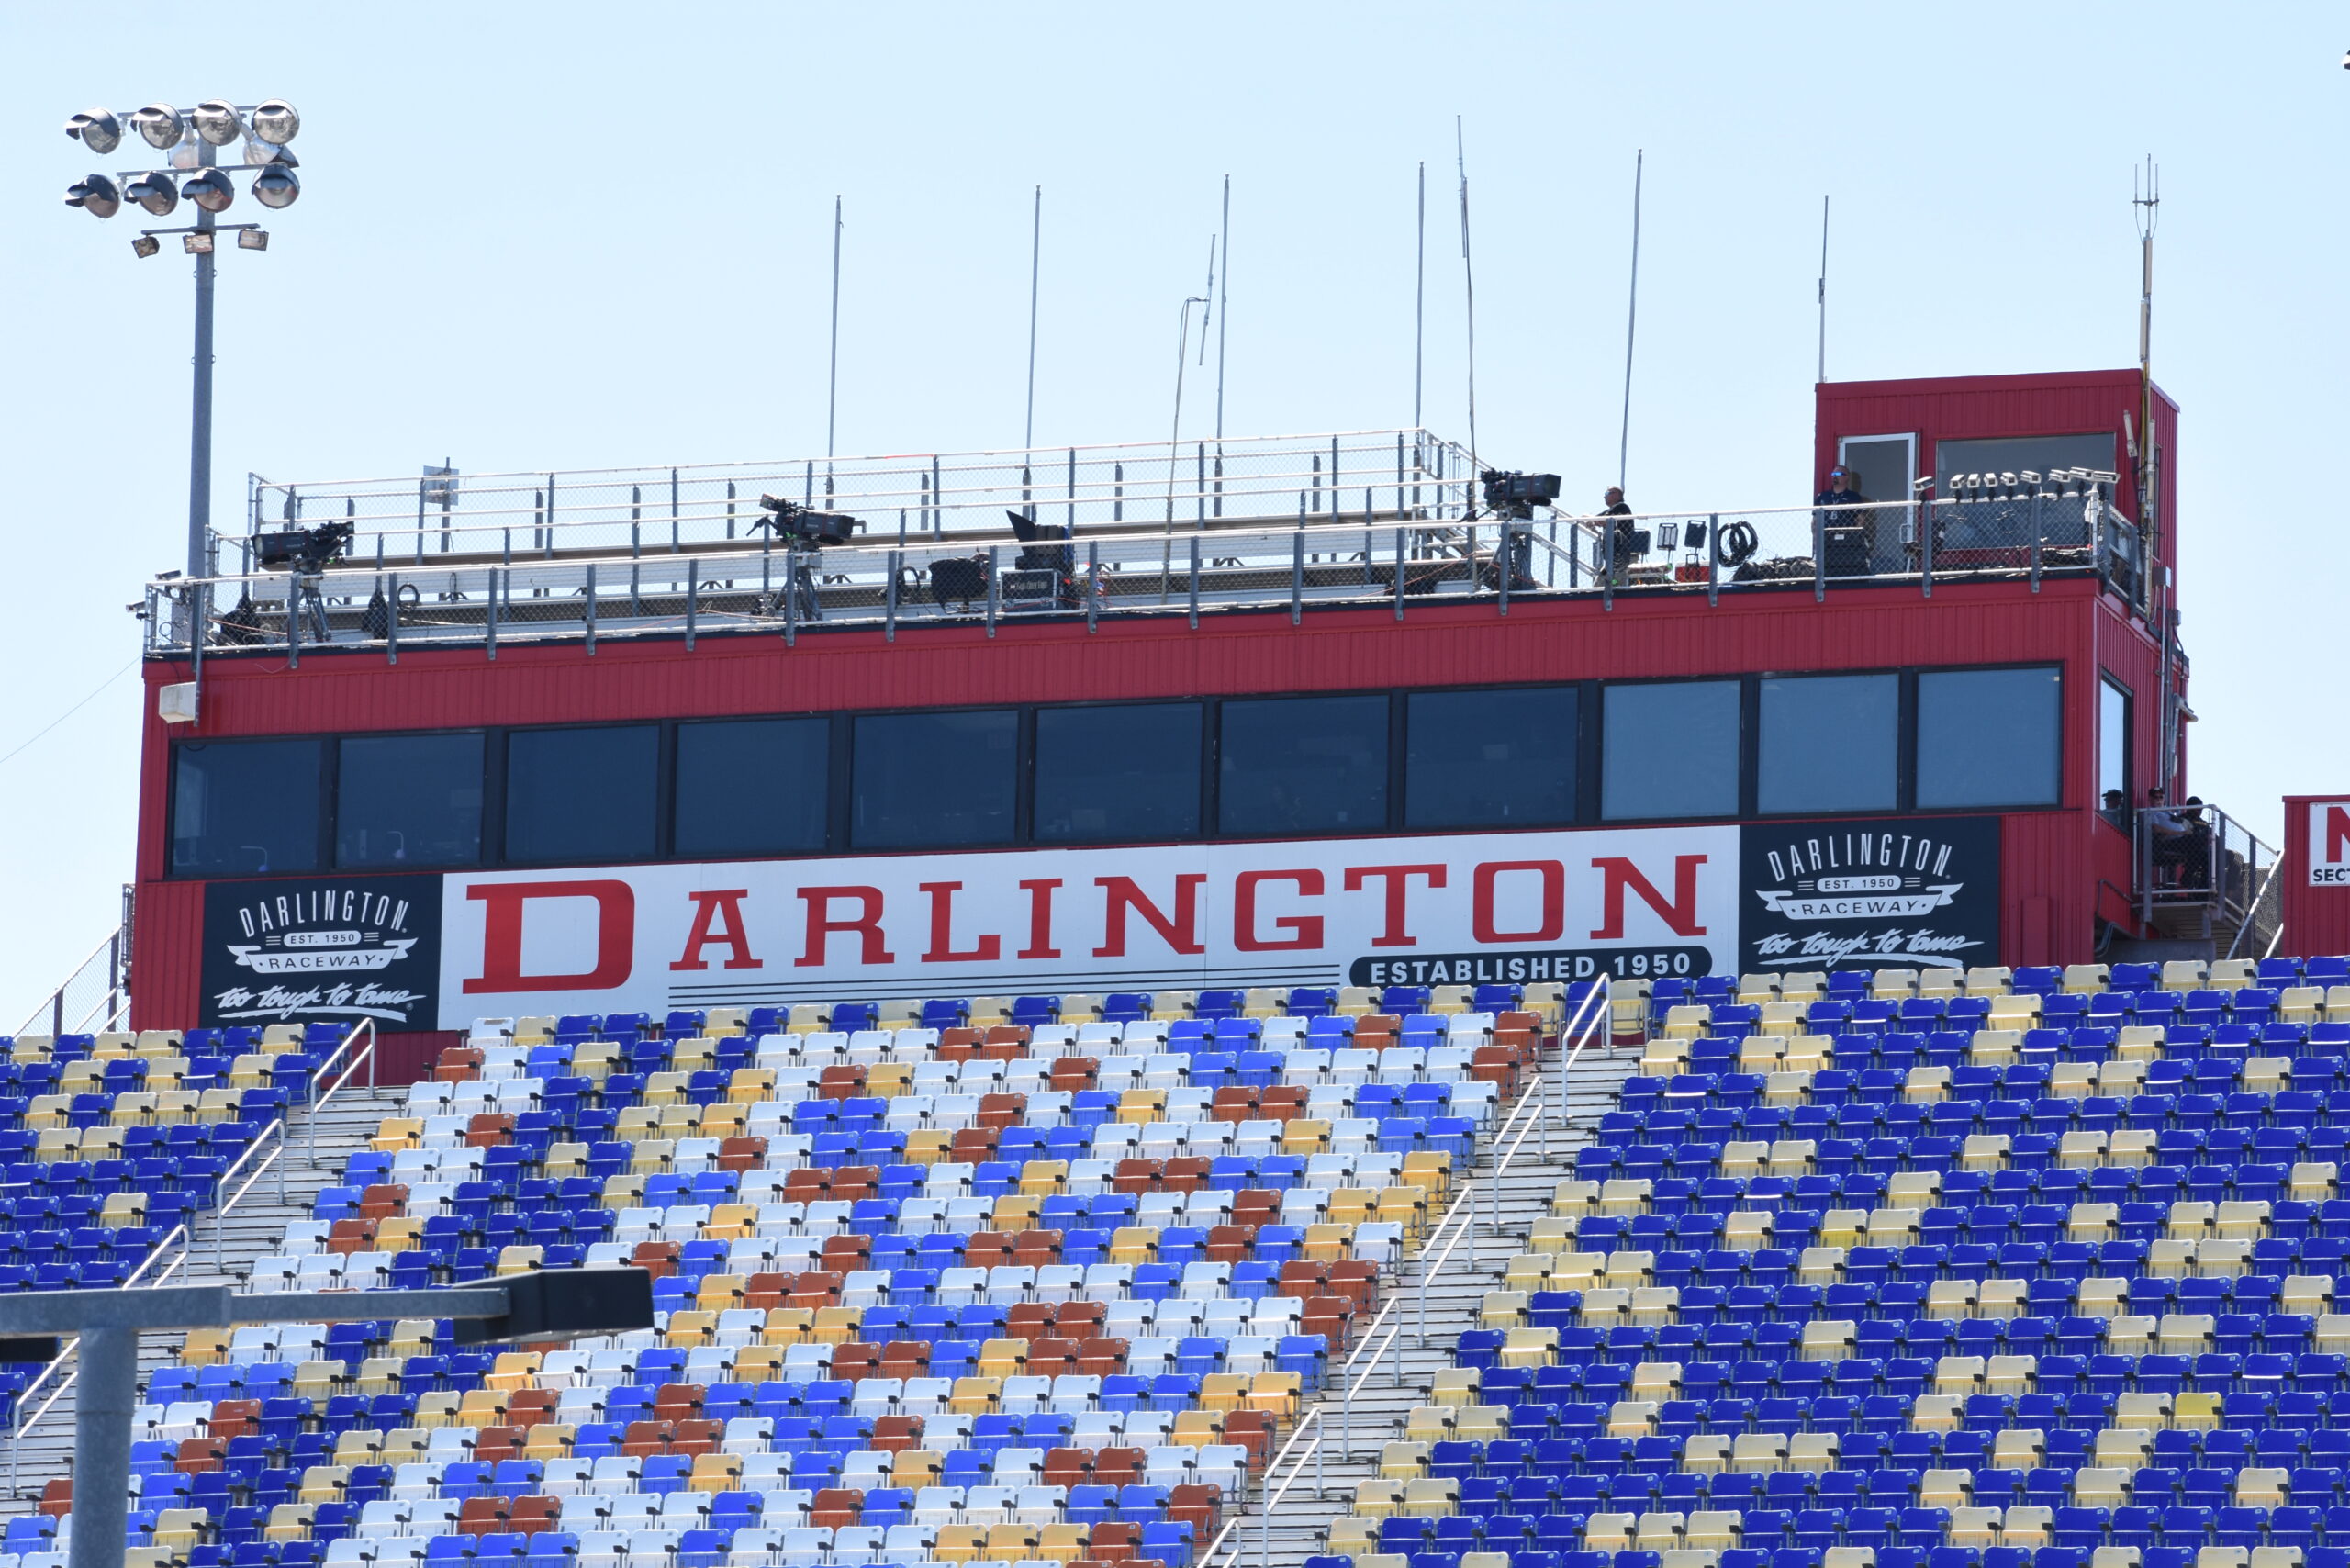 By all means, the Cook Out Southern 500 at Darlington remains a crown jewel race. (Photo: Michael Guarilgia | The Podium Finish)